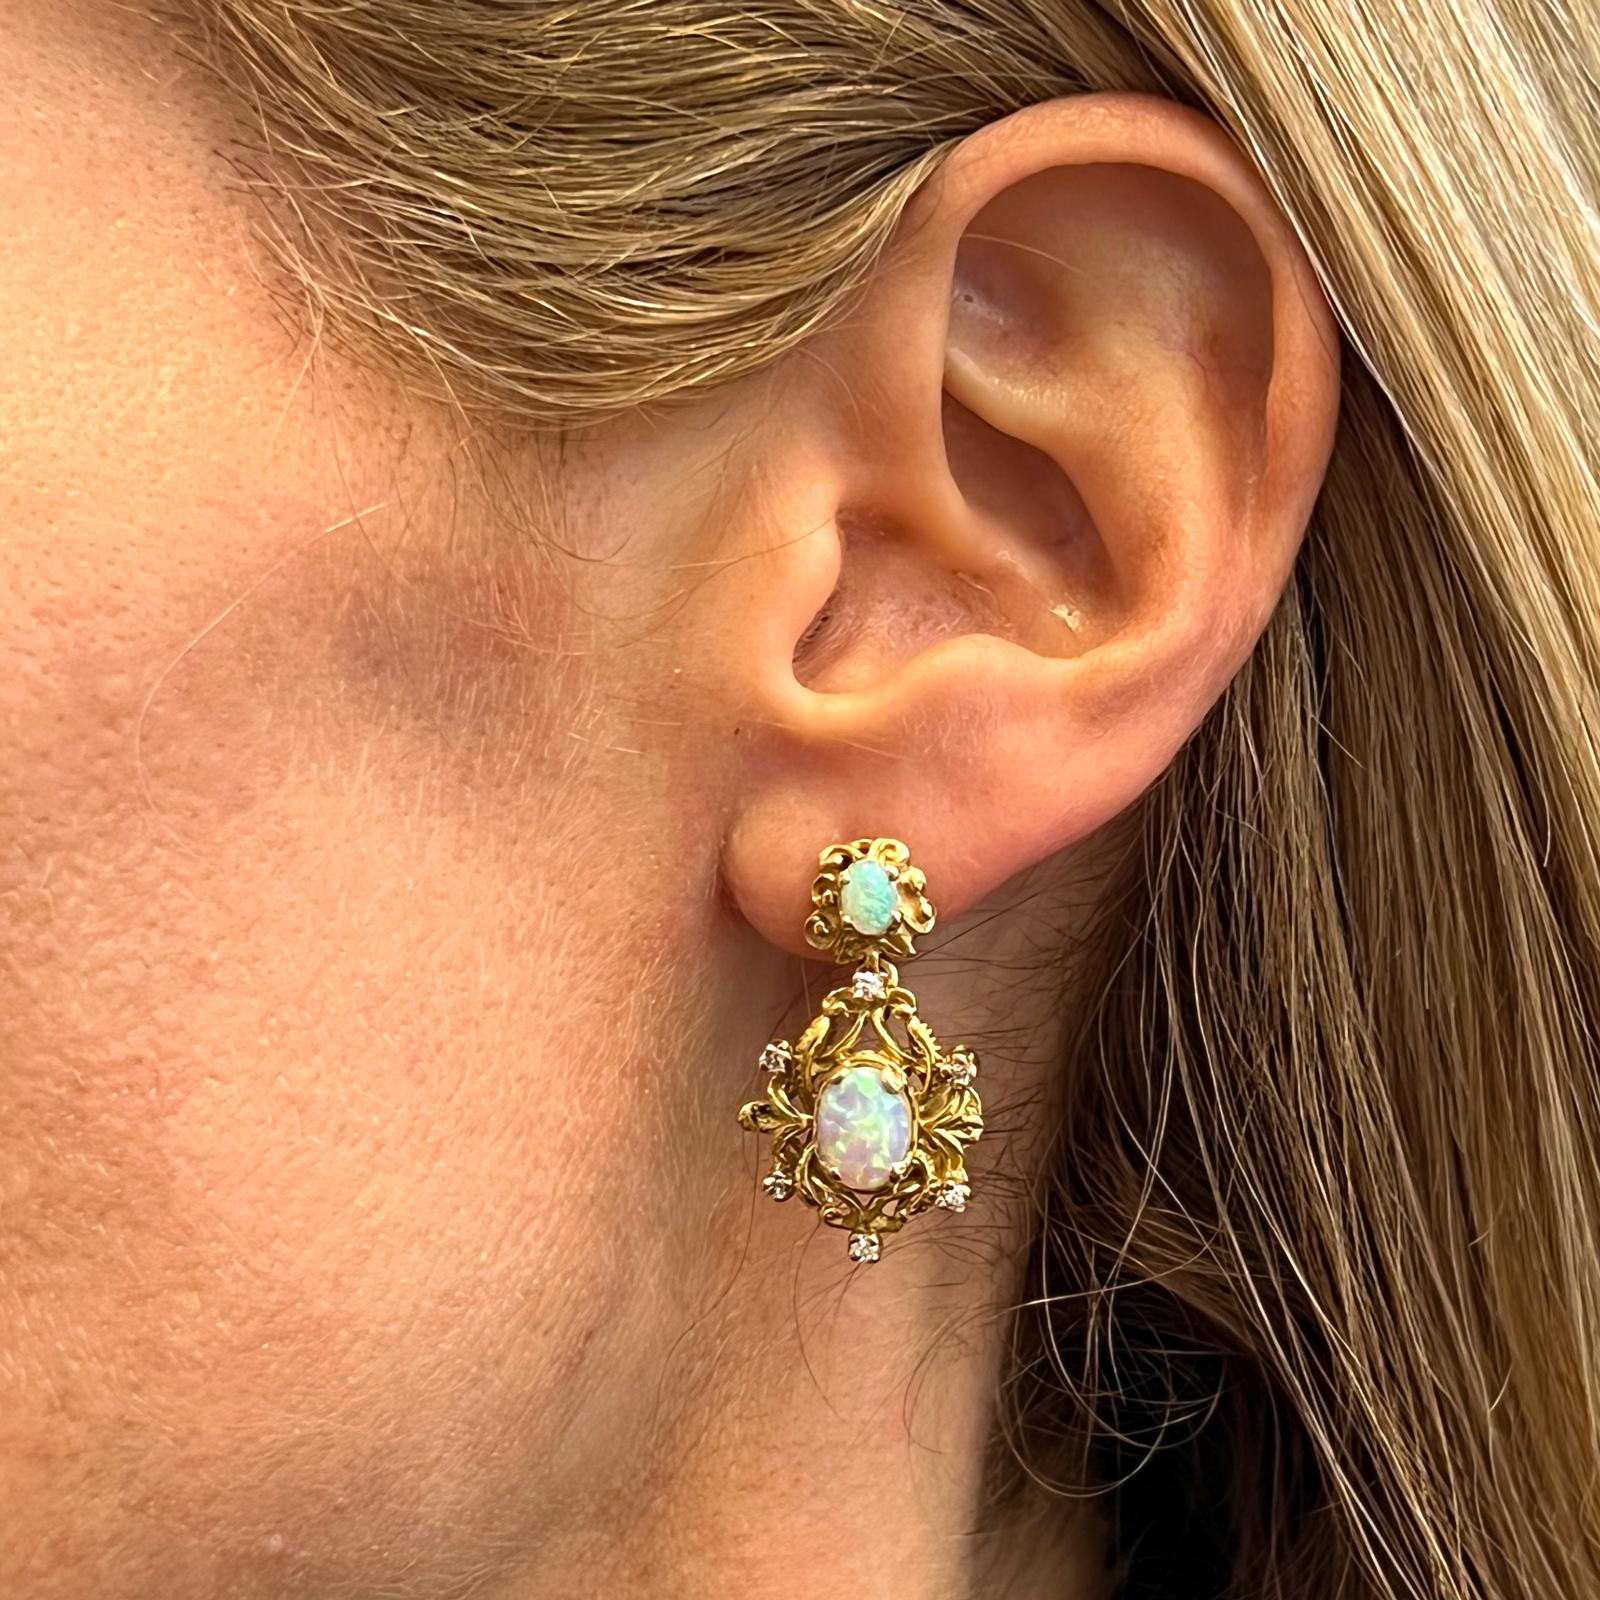 Opal diamond drop earrings crafted in 14 karat yellow gold. The earrings feature 4 colorful opal gemstones and 12 round brilliant cut diamonds weighing .25 carat total weight. The diamonds are graded H-I color and SI clarity. The earrings are